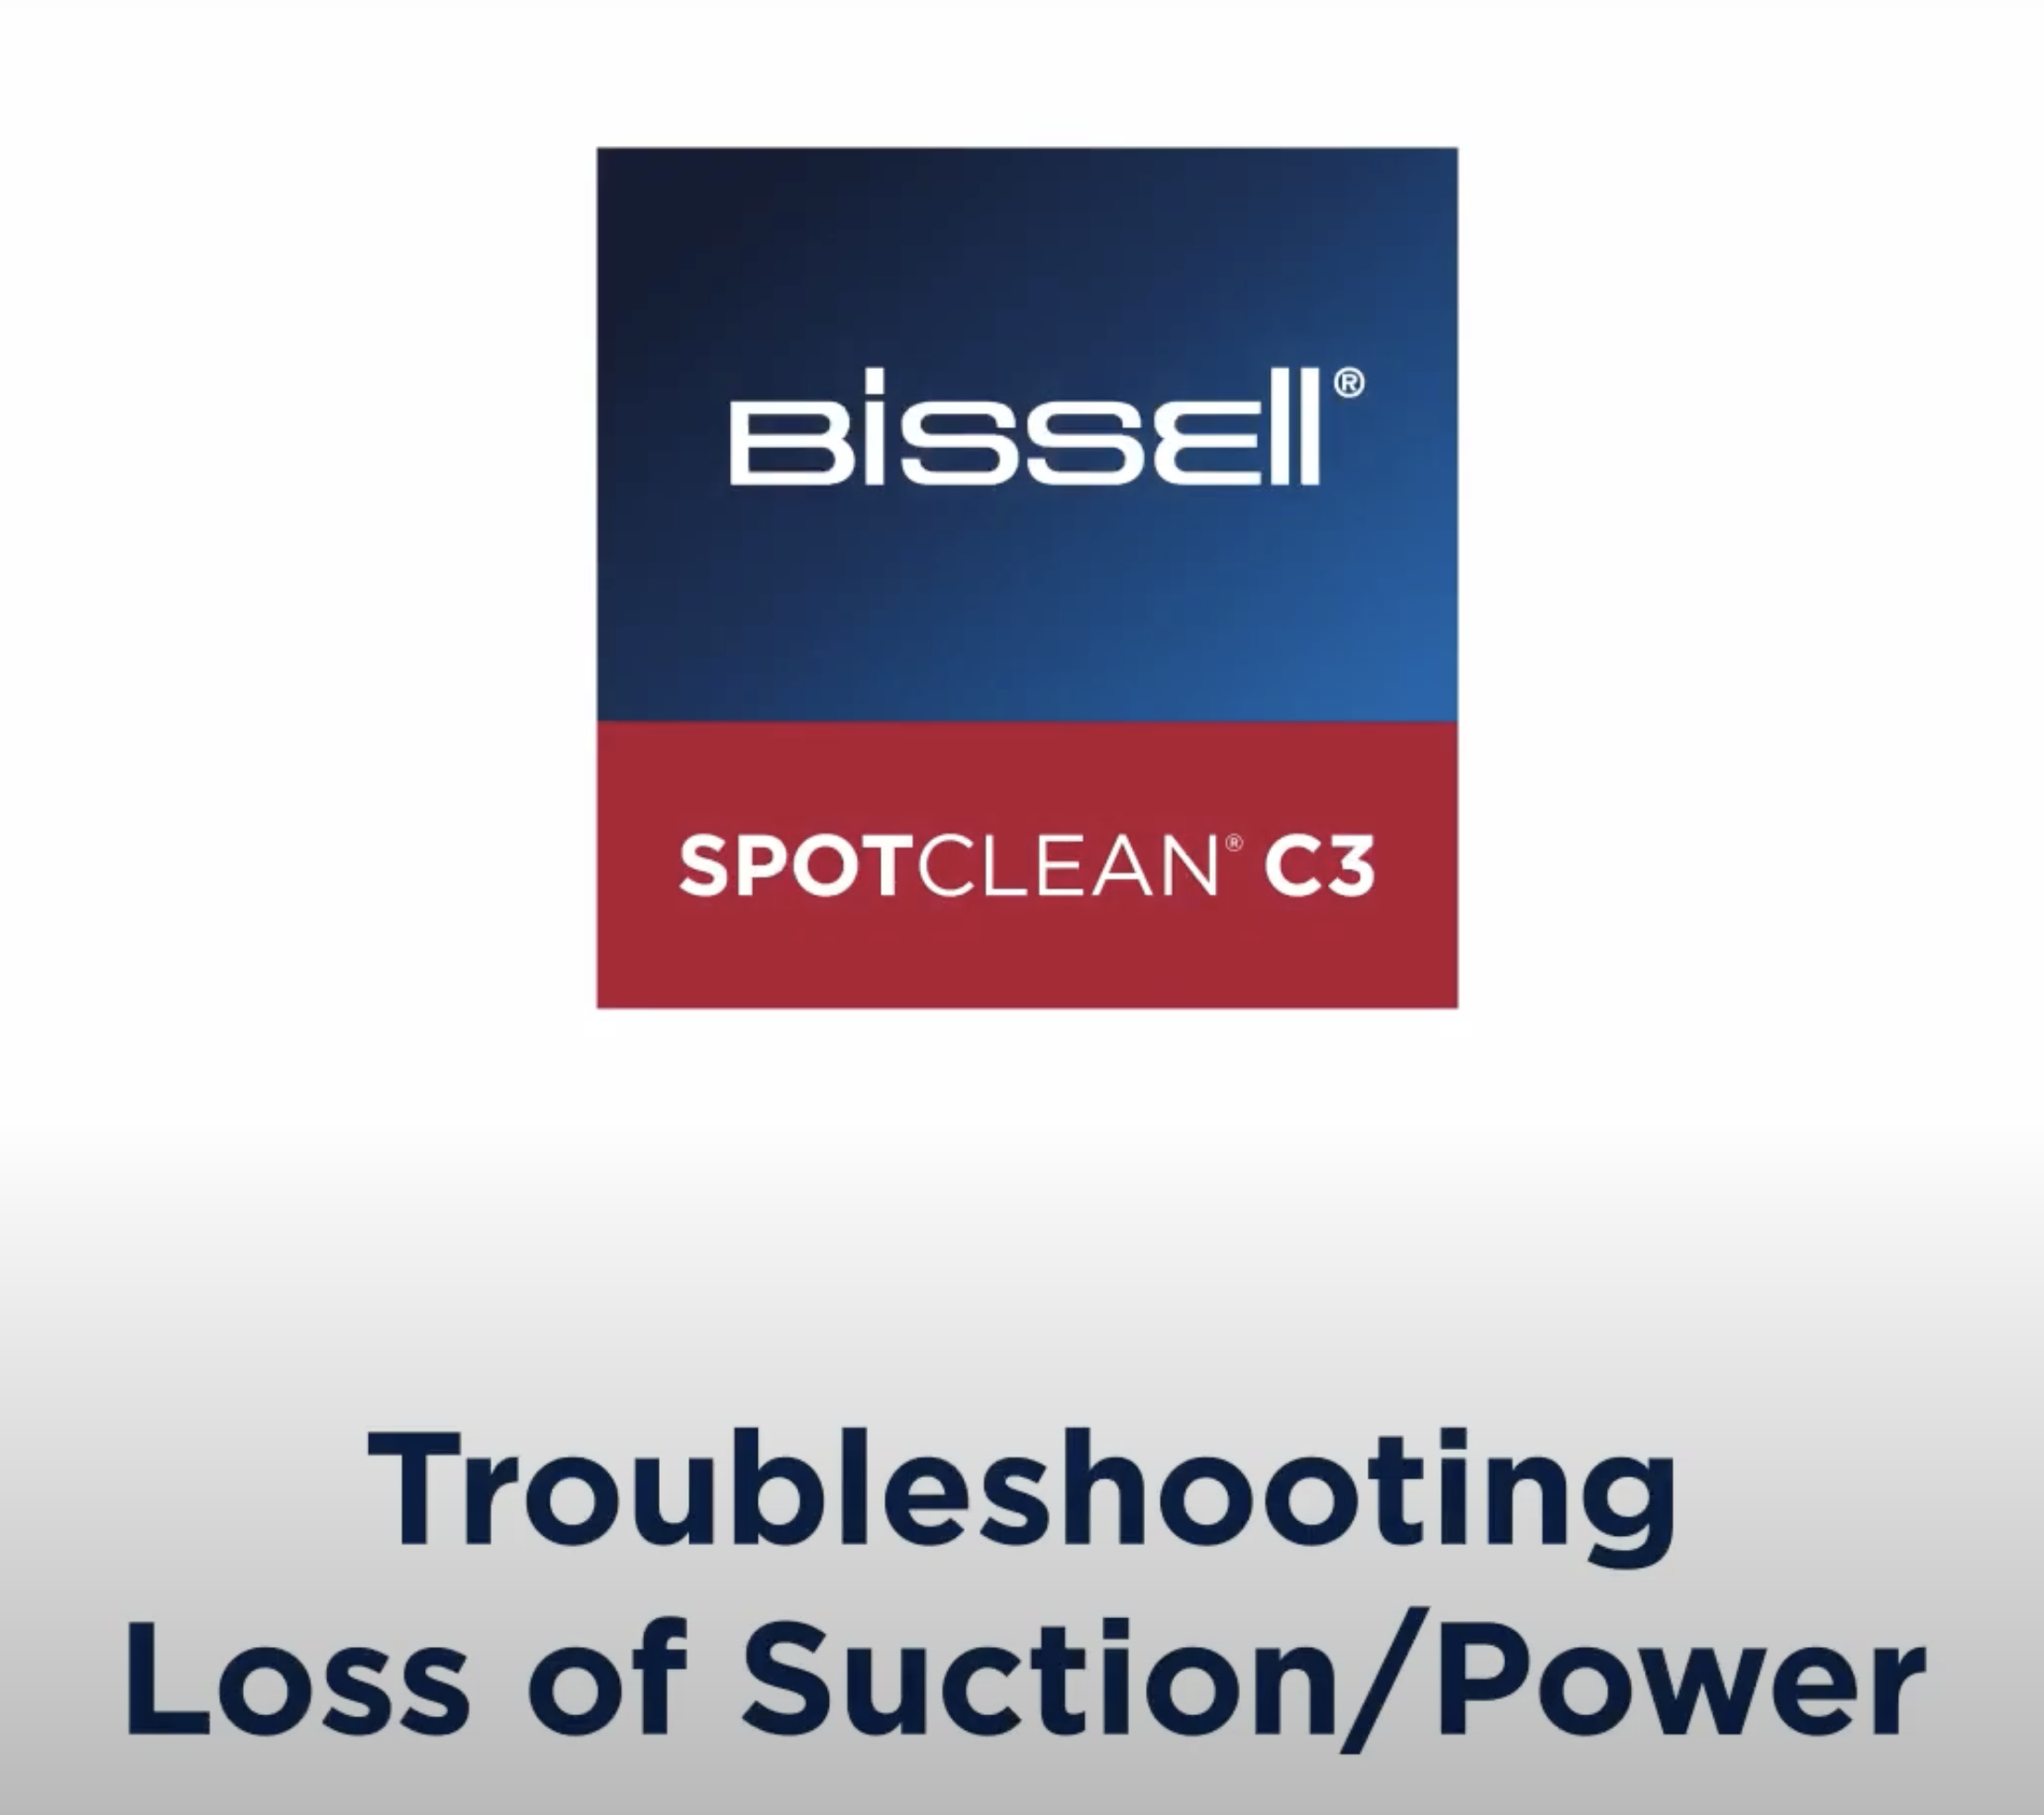 BISSELL SpotClean C3 - No Suction